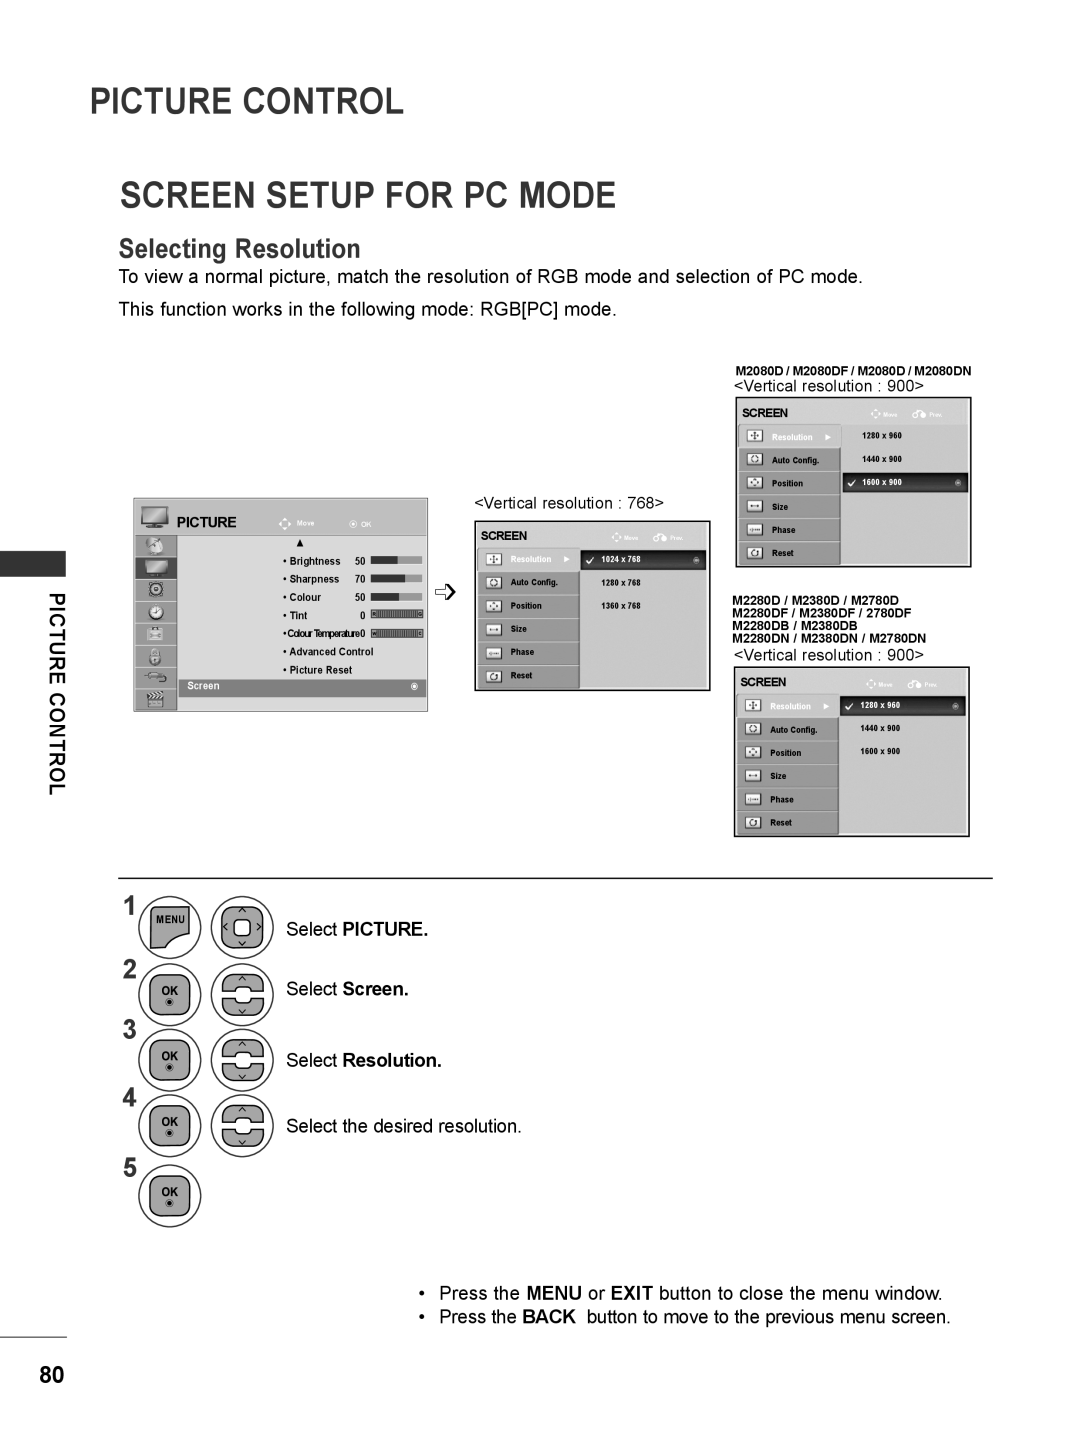 LG Electronics M2380D, M2780DF, M2780DN Picture Control Screen Setup For Pc Mode, Selecting Resolution, Select Resolution 